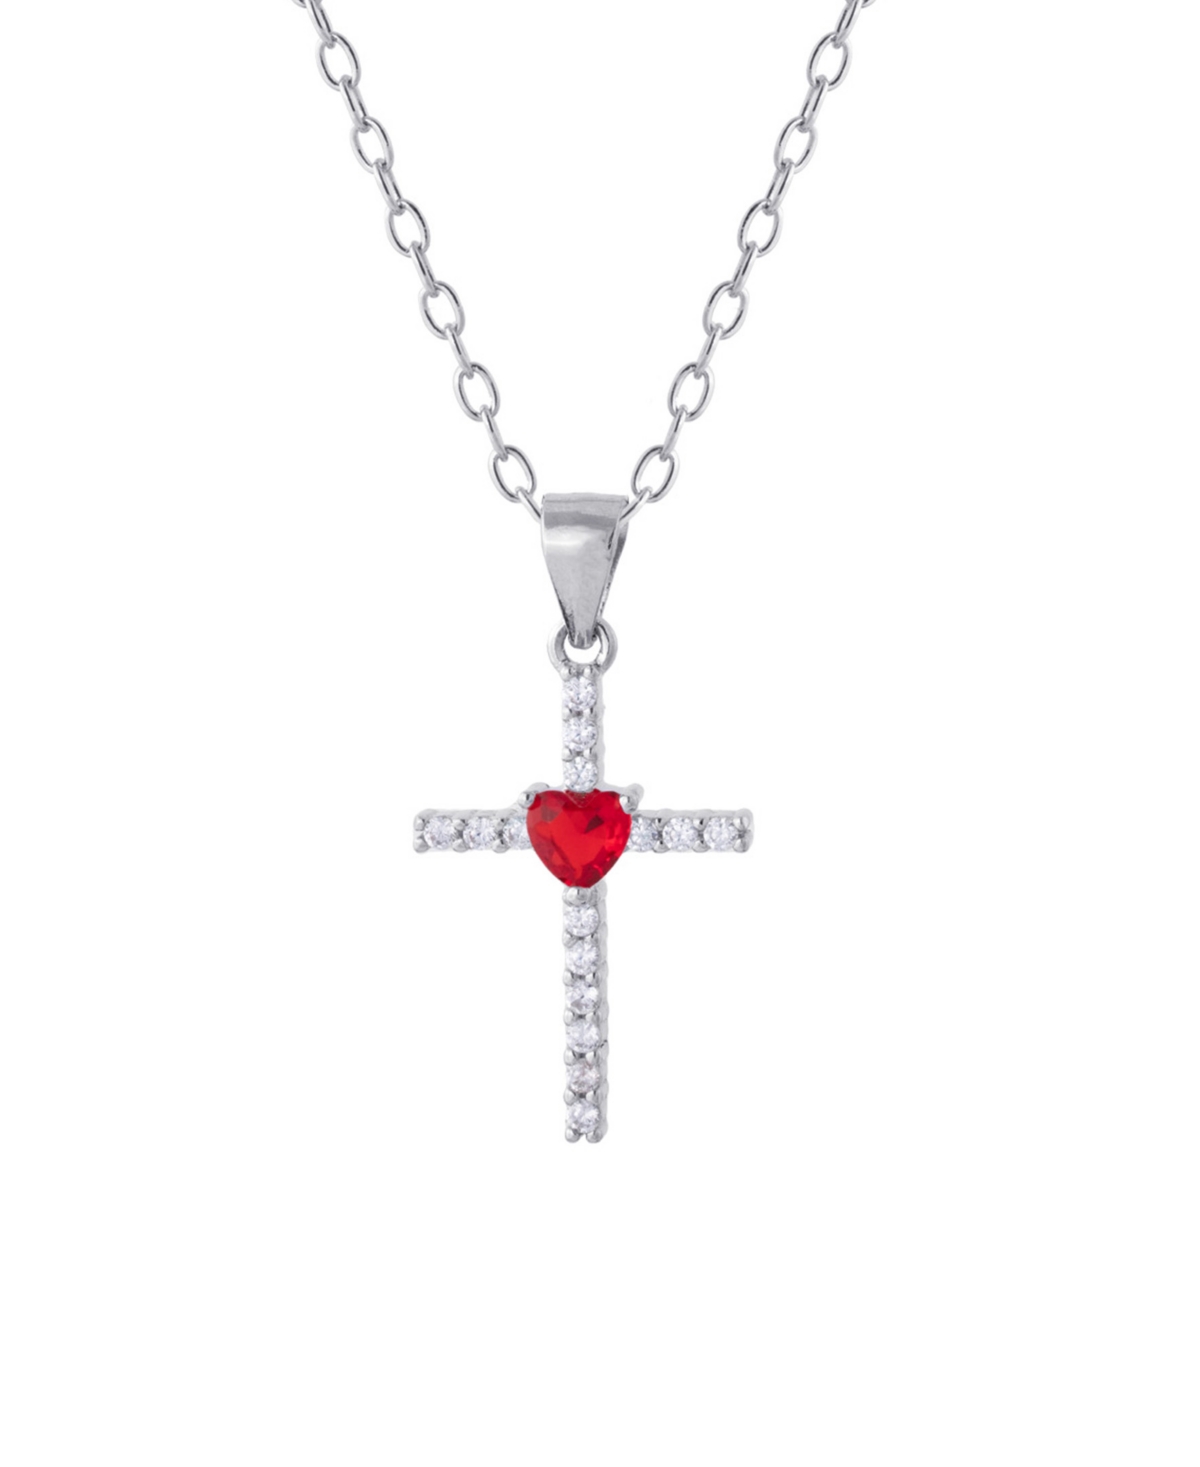 Giani Bernini Gianni Bernini Cubic Zirconia And Heart Glass Cross Pendant Necklace (0.70 Ct. T.w.) In Sterling Sil In Red